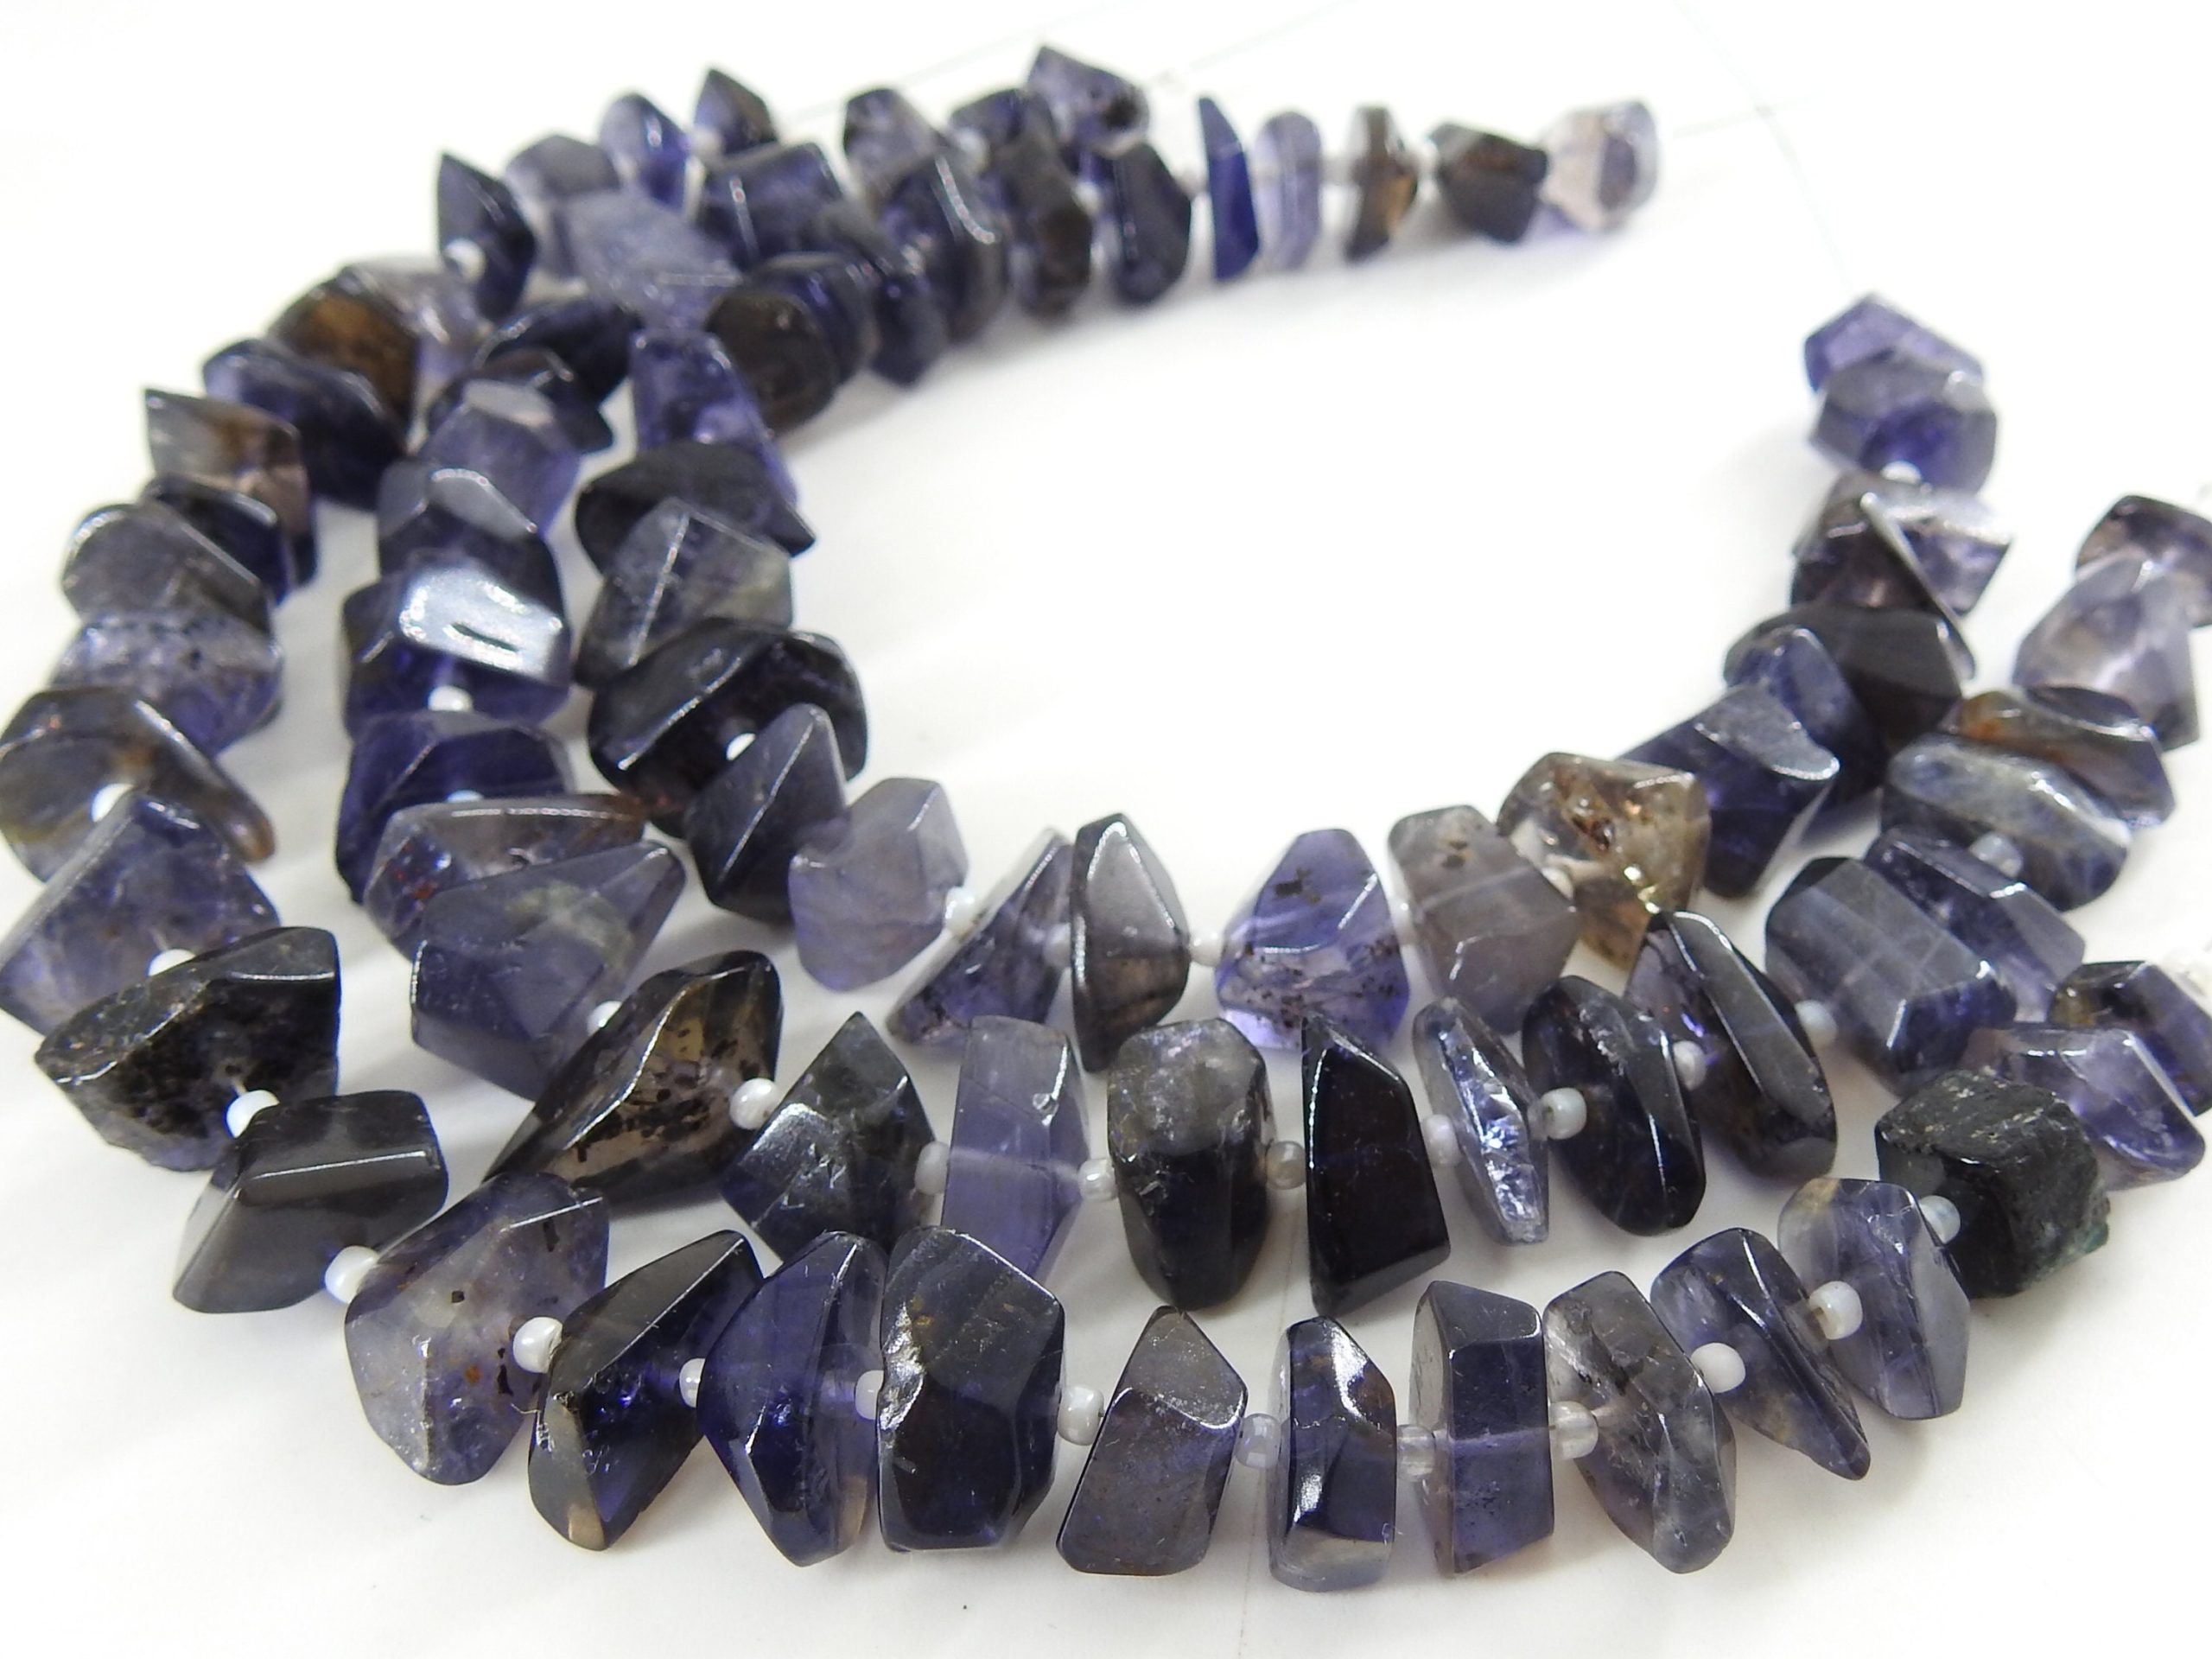 Iolite Faceted Tumble Beads,Nuggets,Irregular Shape,Loose Stone,Handmade,For Making Jewelry,Bracelet, 8Inch 18-10MM Approx,100%Natural TU5 | Save 33% - Rajasthan Living 10